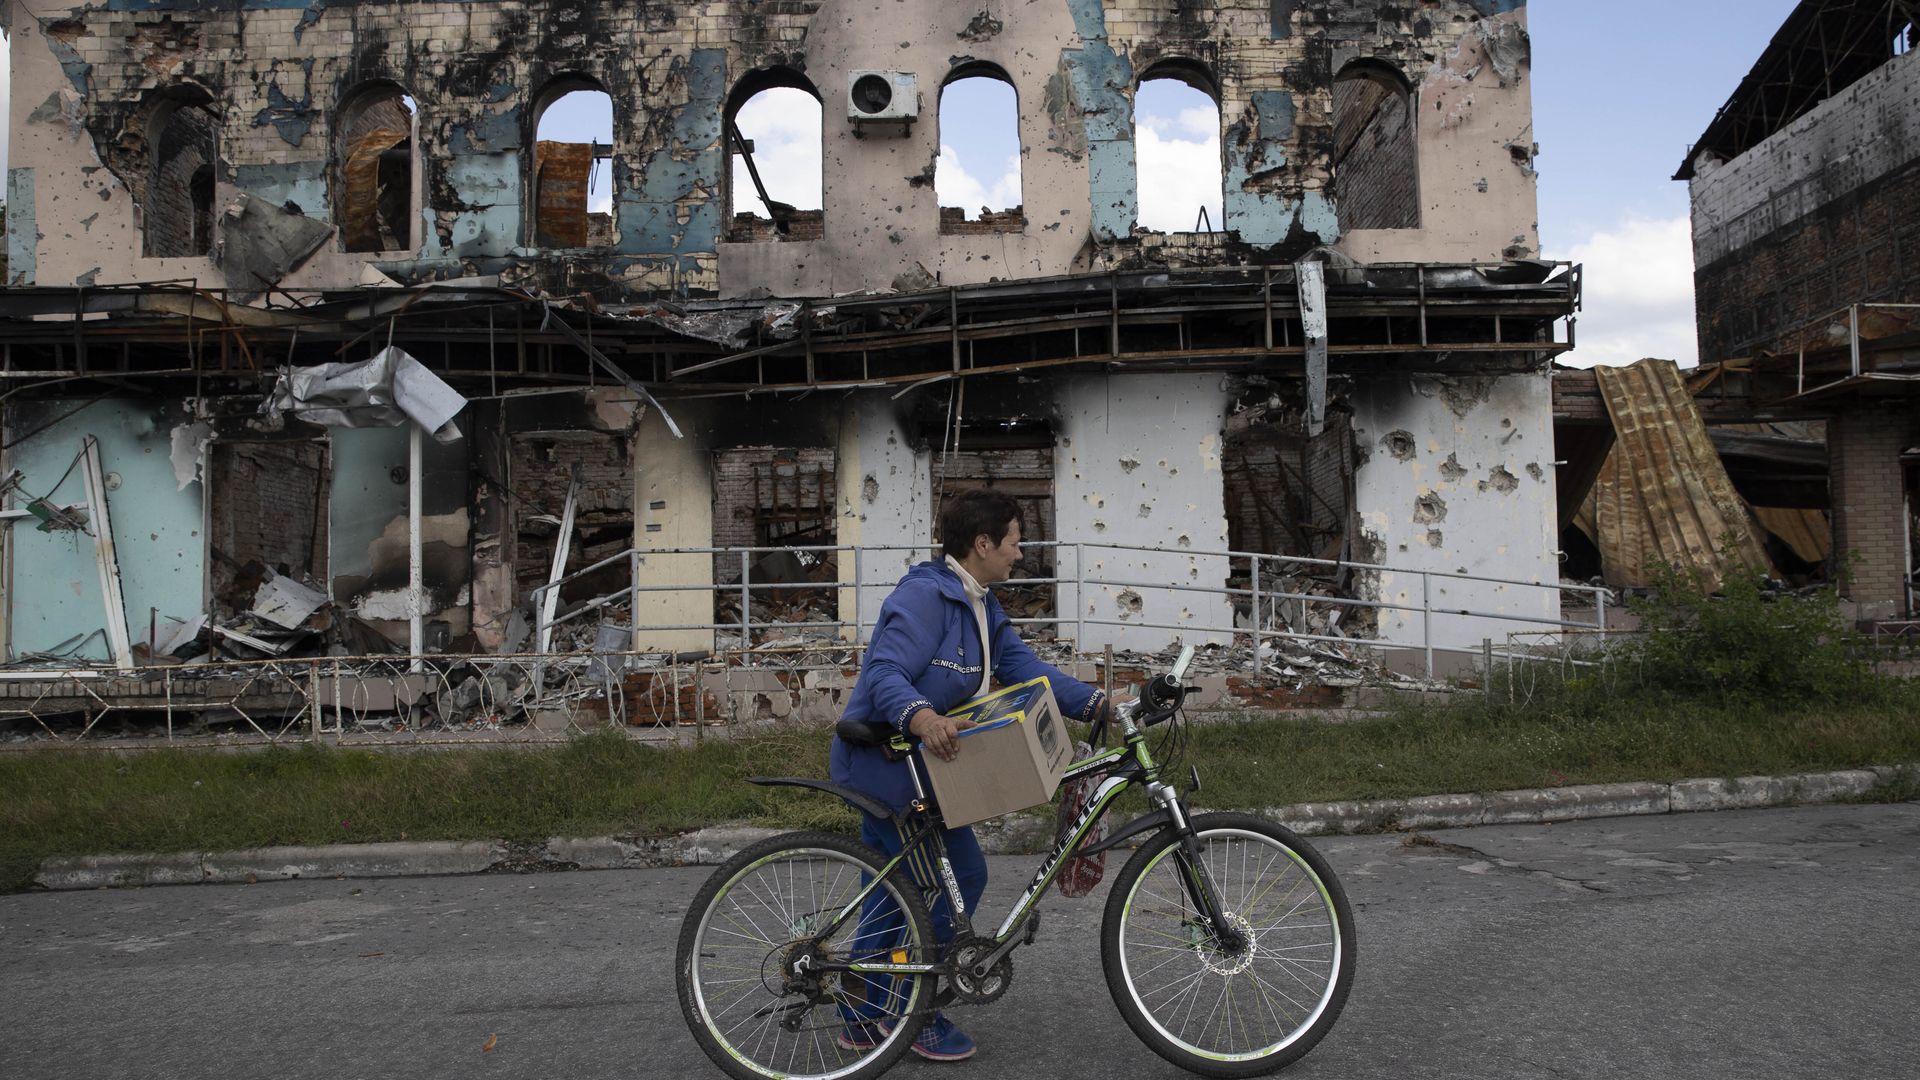 A Ukrainian woman is seen with a bicycle in front of a demolished building in Izium, Kharkiv Oblast, Ukraine on September 18